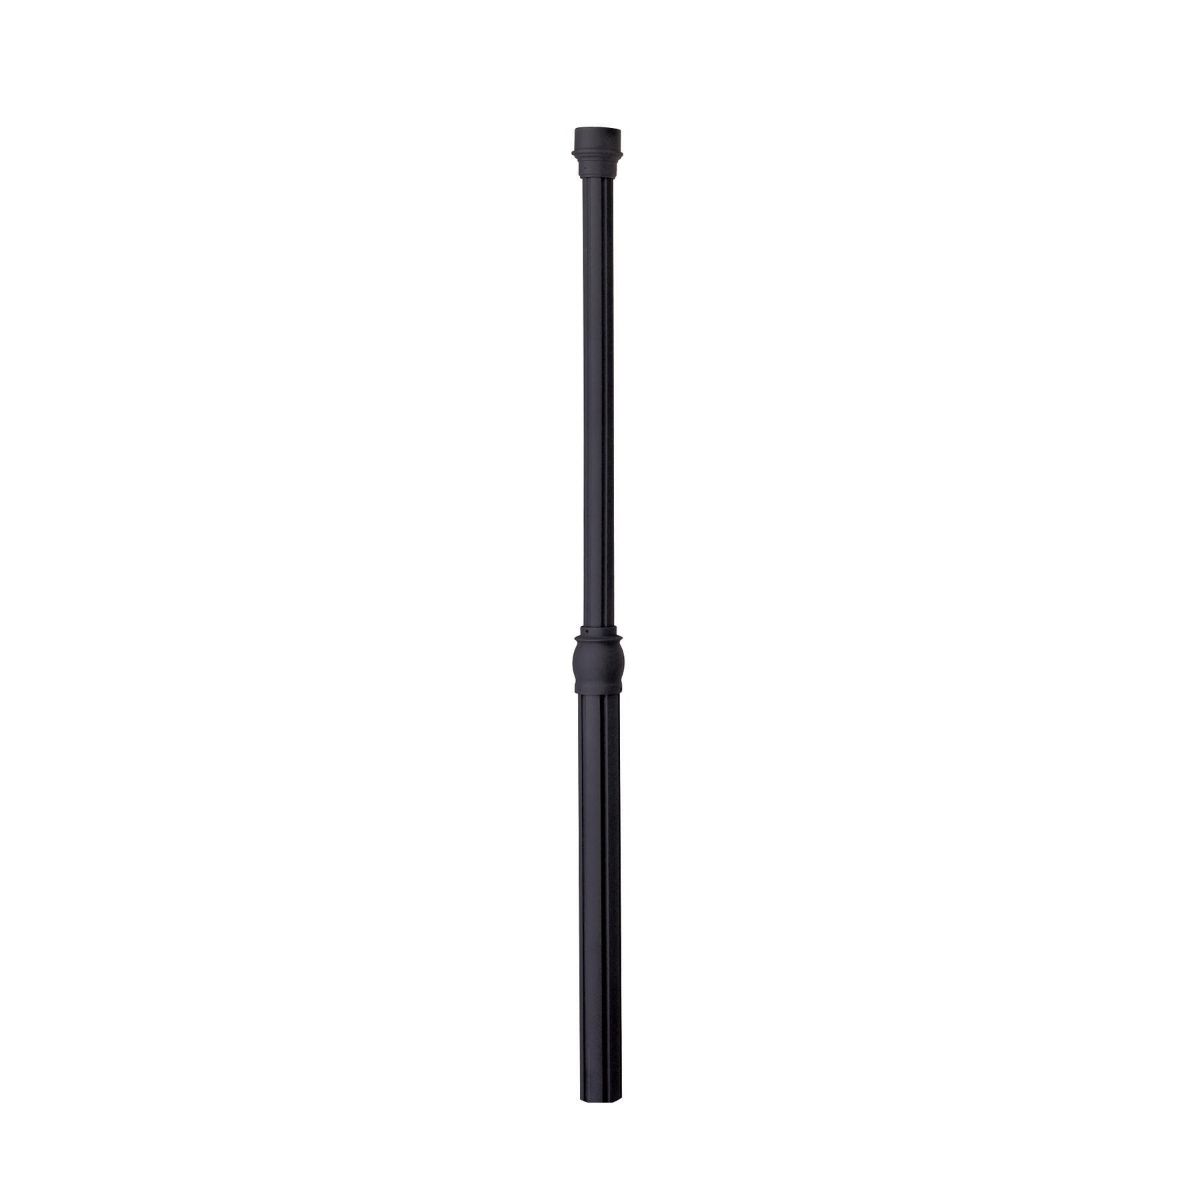 8.5 ft Round Aluminum Direct Burial Pole 3.5 In. Shaft Black Finish